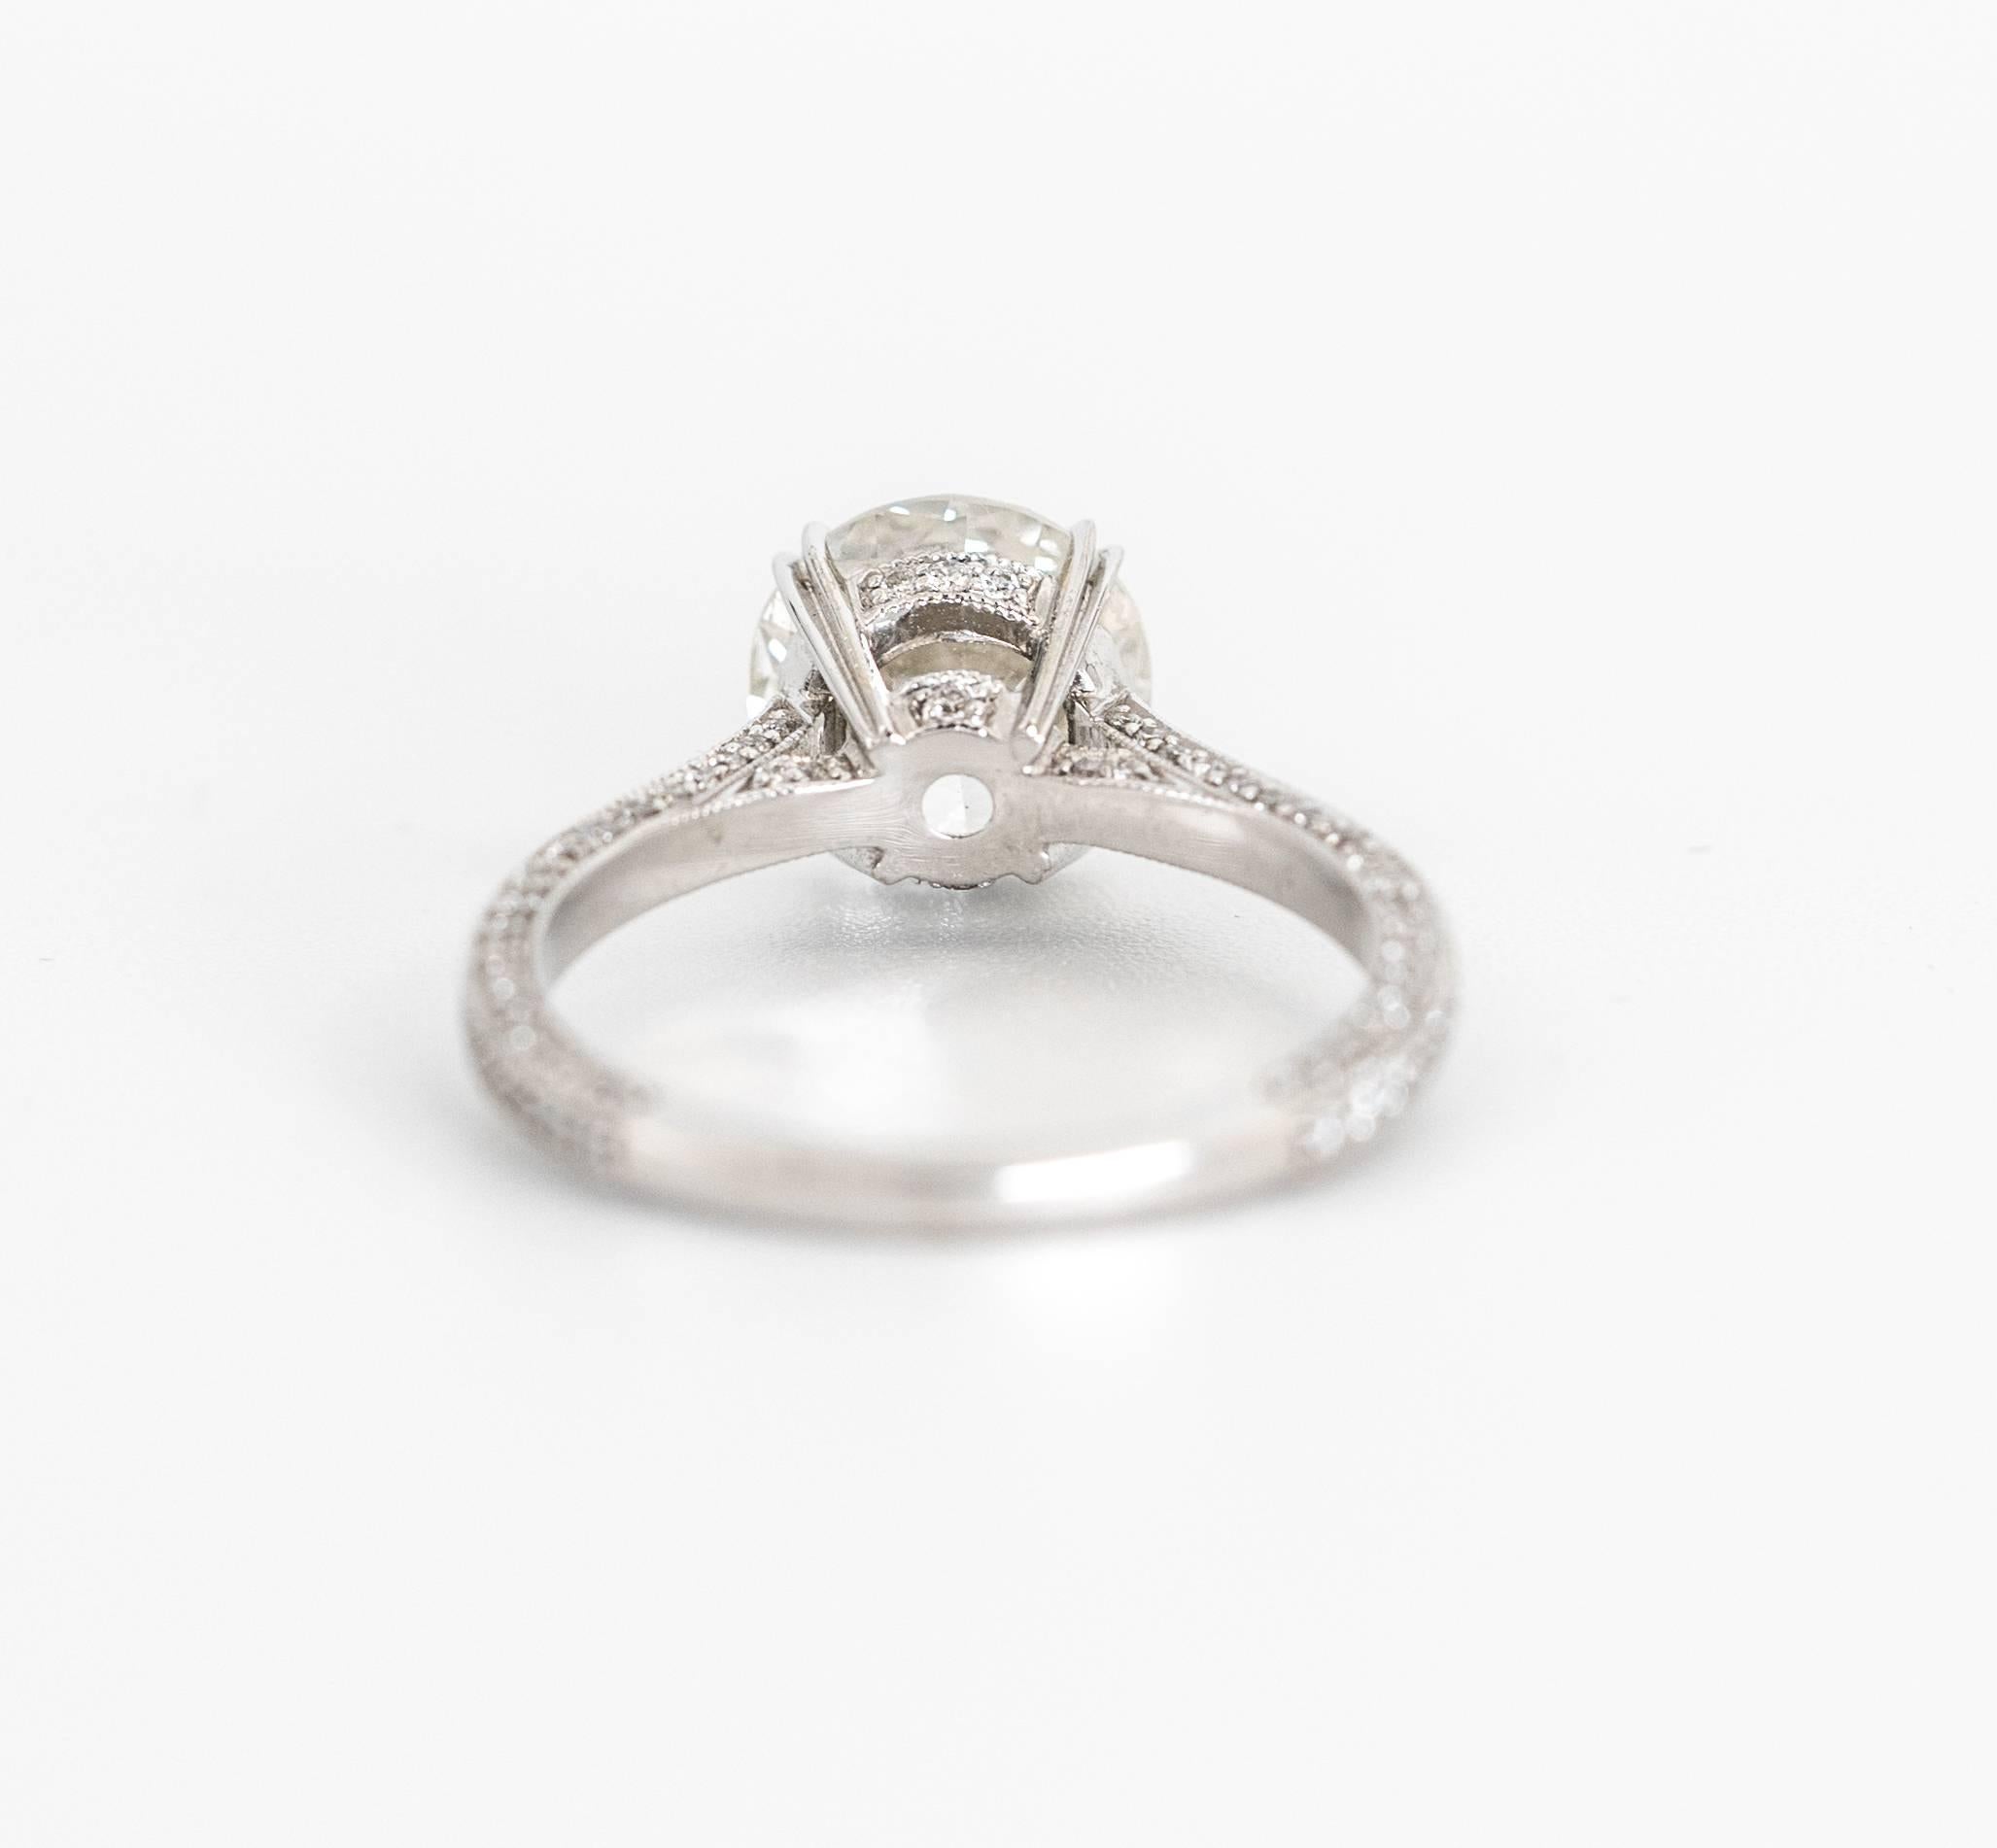 Contemporary 2.28 Carat Old Euro Cut Diamond Engagement Ring, in 18K, by The Diamond Oak